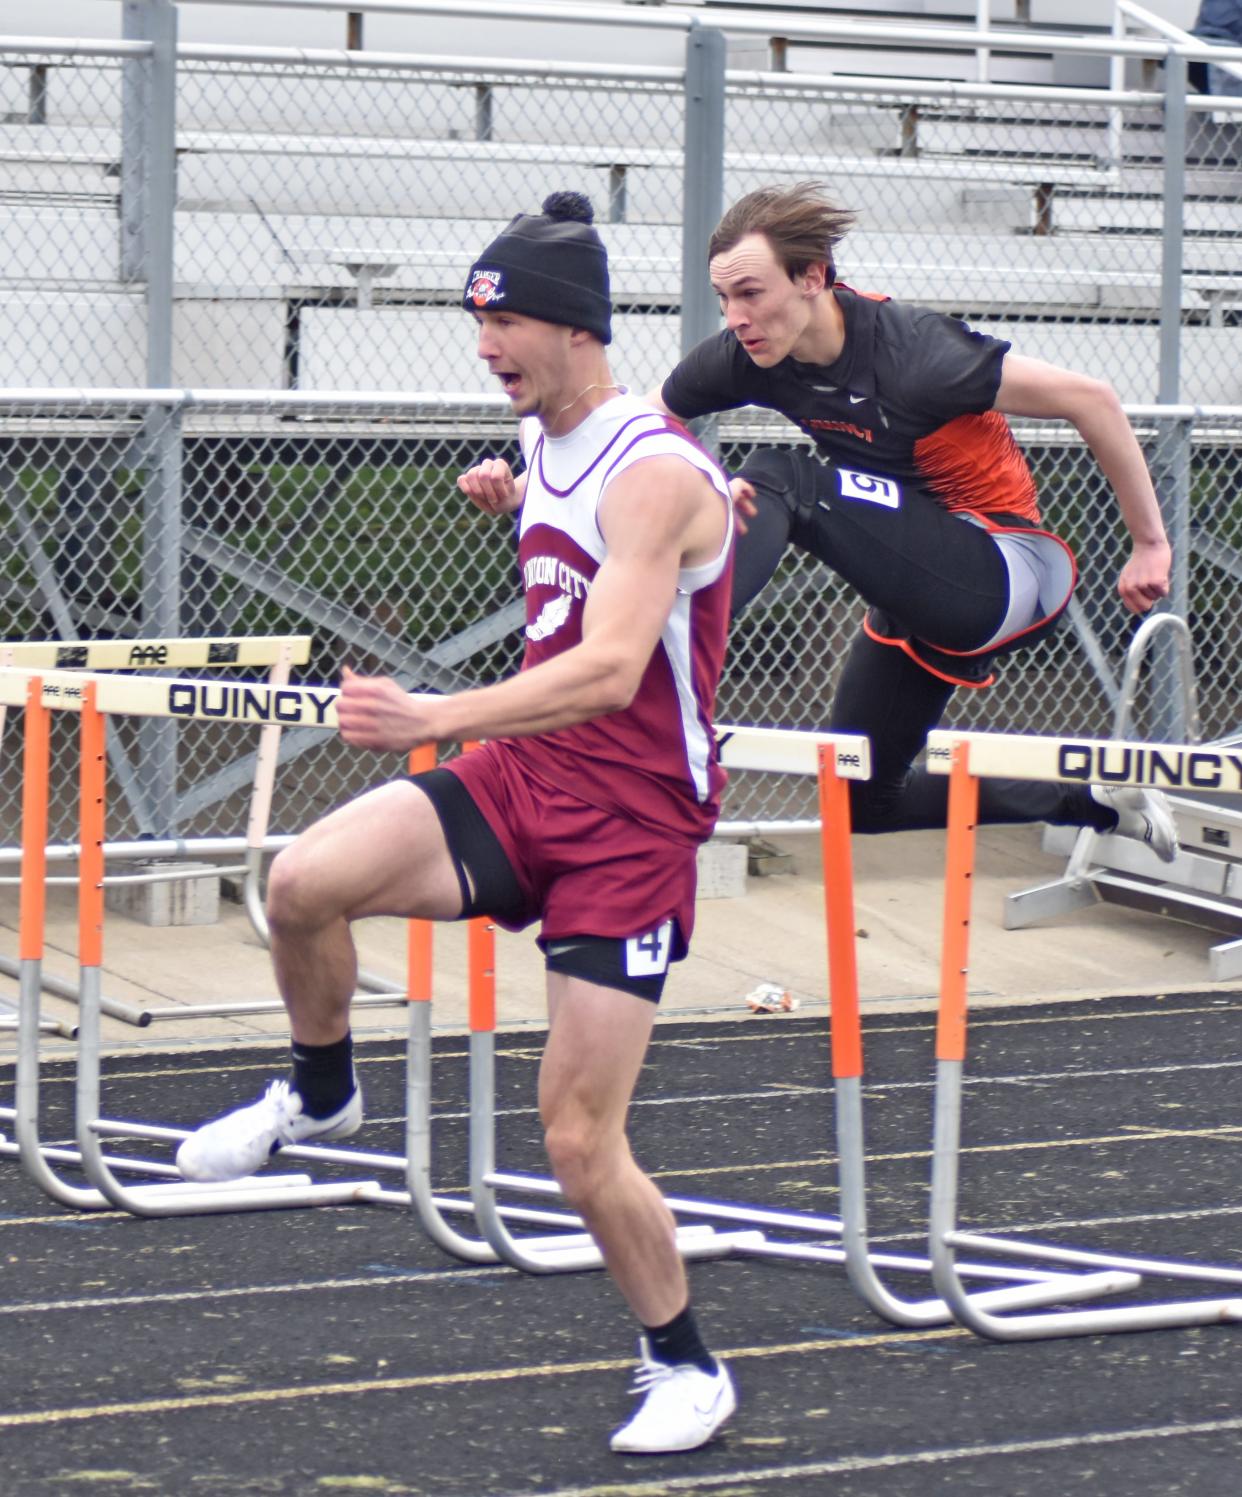 Union City's Nathaniel Maurer leads Quincy's Clayton Benson at the midway point of the 110 meter hurdles on Wednesday. Maurer went on to take first, Benson finished second.